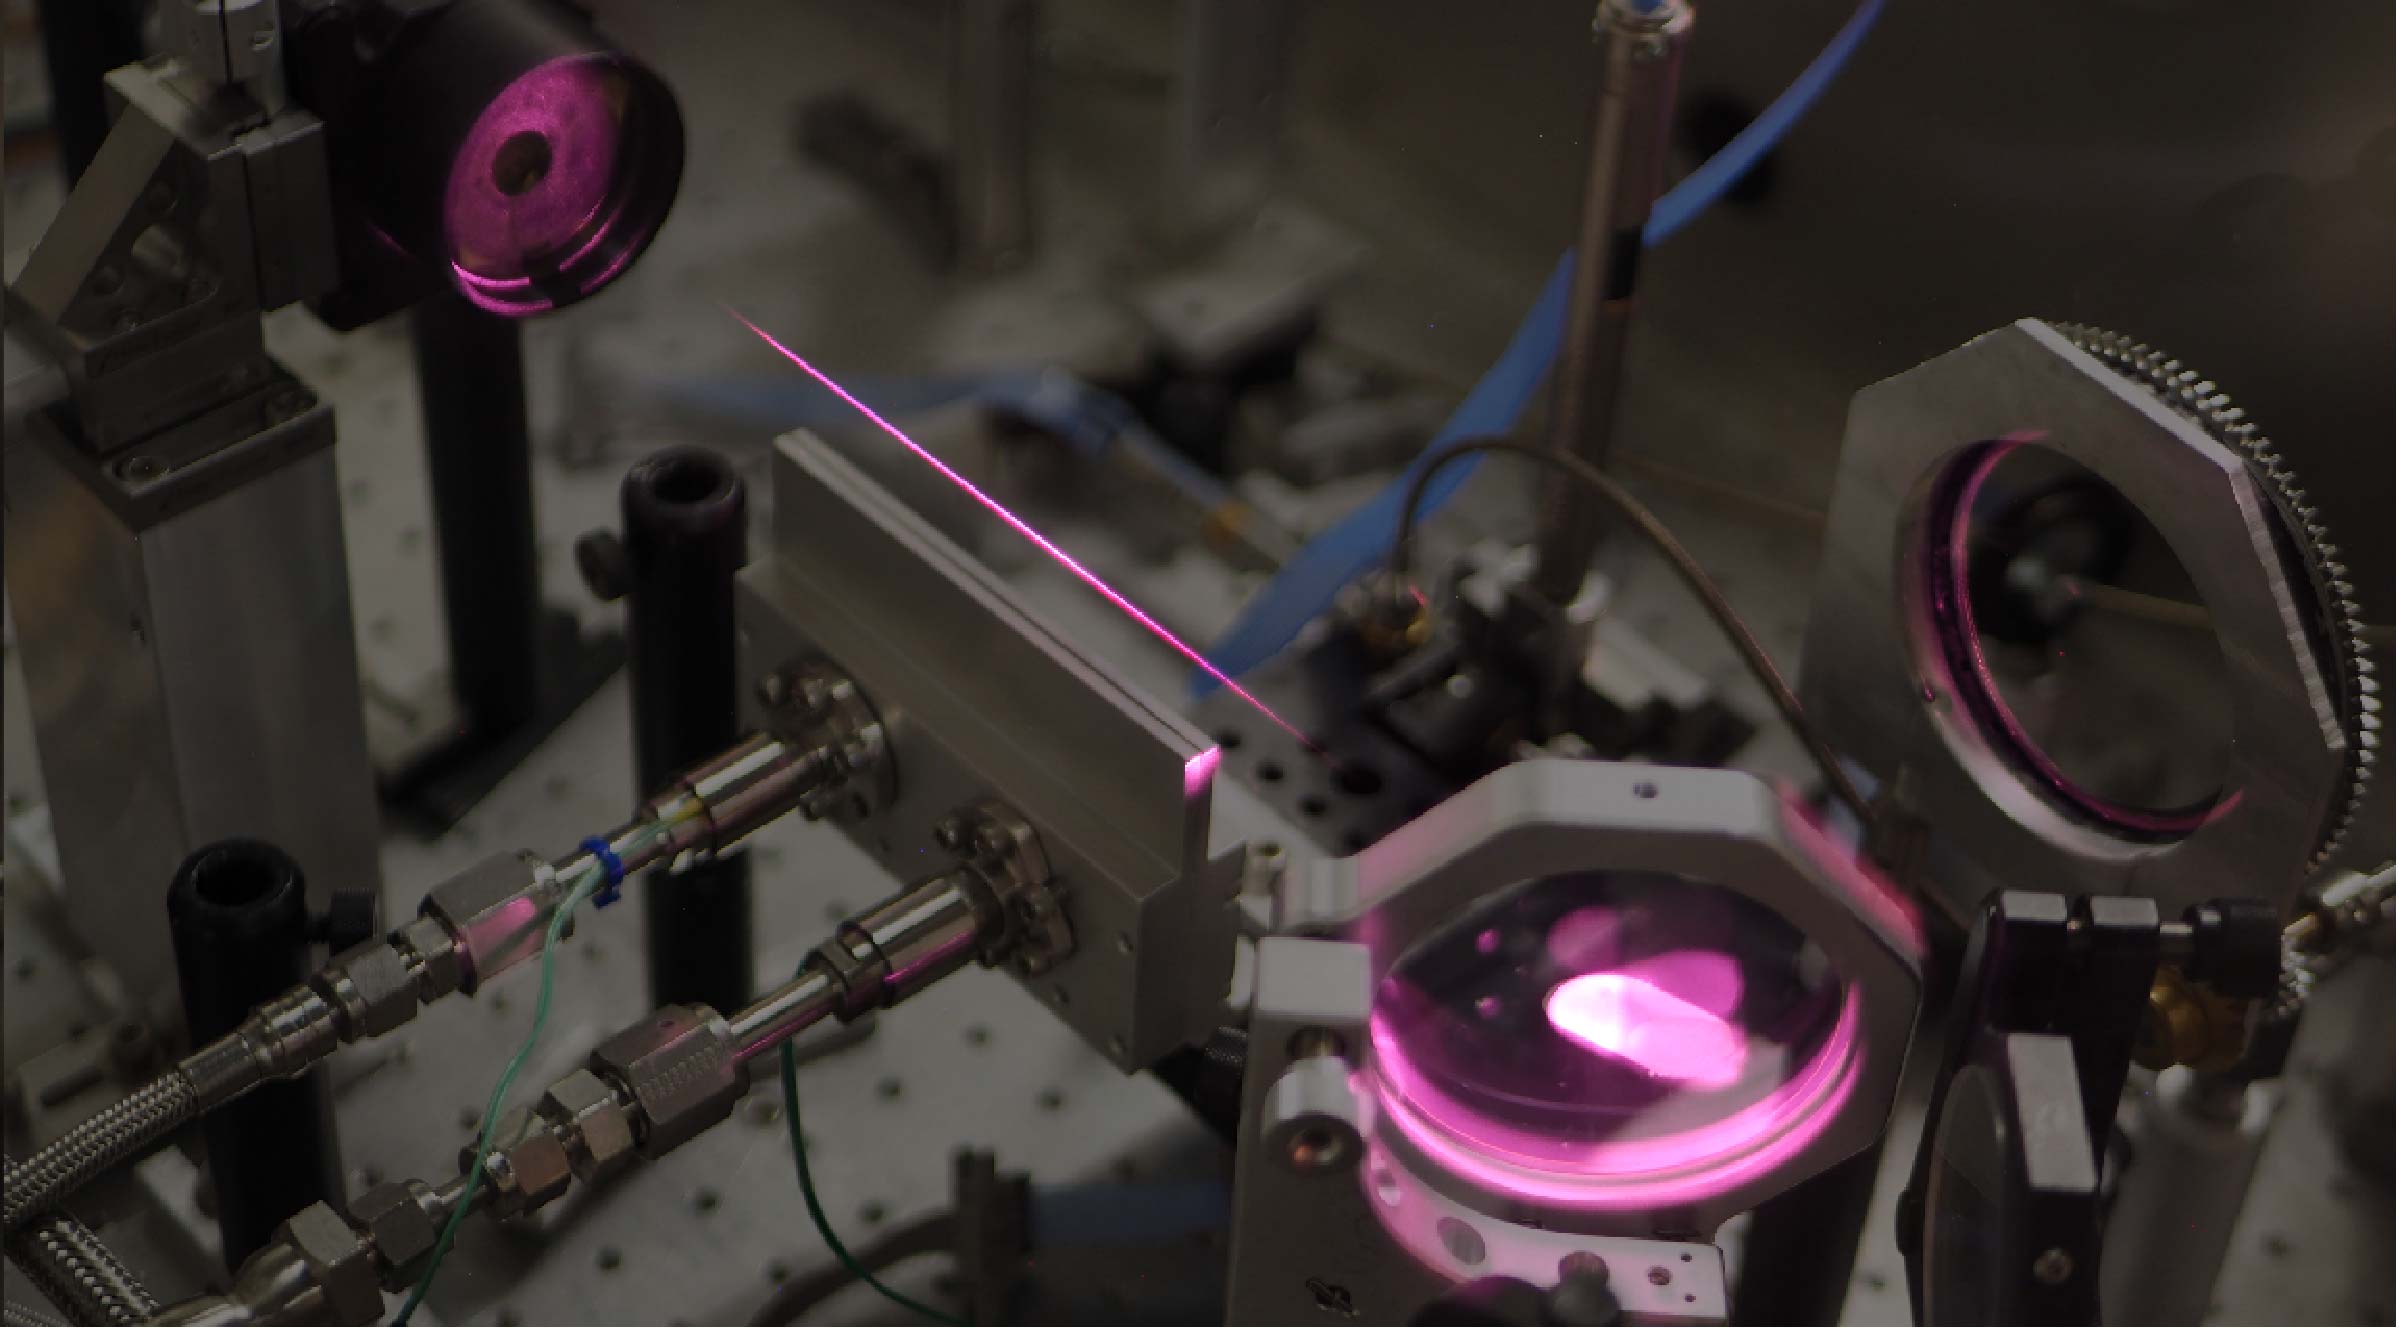 Lasers are used to create an indestructible optical fiber out of plasma that helps researchers confine a separate laser pulse as it travels through the plasma. (Credit: Intense Laser-Matter Interactions Lab, University of Maryland)